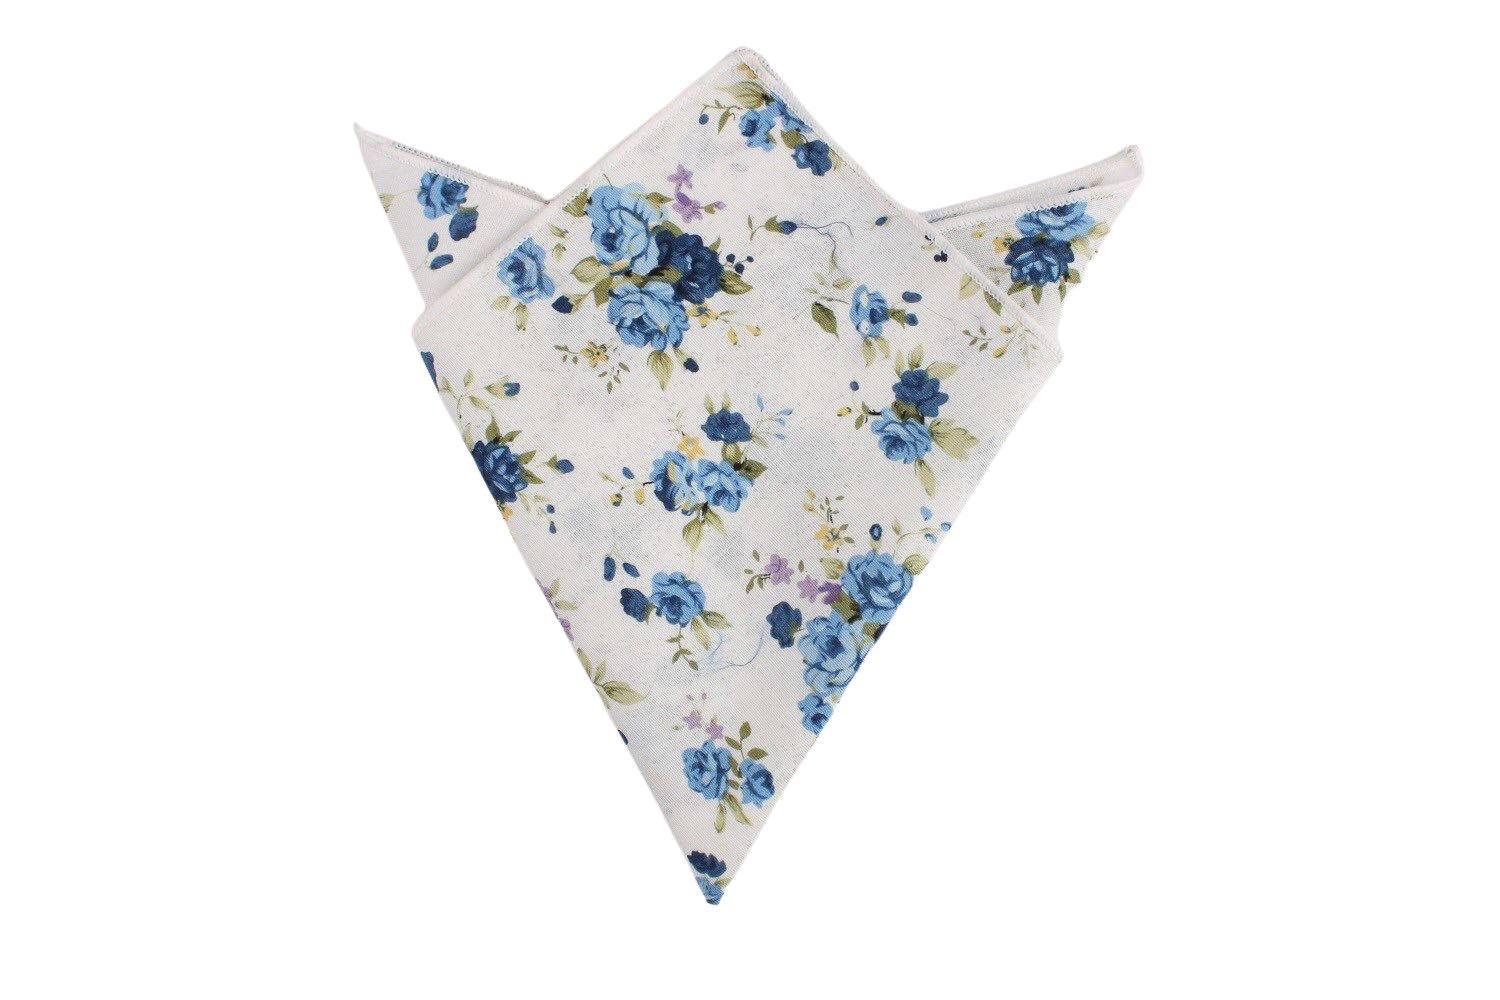 White Floral Pocket Square Mytieshop - SAGE Mytieshop White Floral Pocket SquareMaterial CottonItem Length: 23 cm ( 9 inches)Item Width : 22 cm (8.6 inches) The epitome of sophisticated style, this white floral pocket square is perfect for that sharp dressed man. Whether you're accessorizing for a wedding, a formal event, or just for work, this pocket square is sure to elevate your look. The delicate florals are understated and elegant, and the pocket square itself is made of high-quality fabric